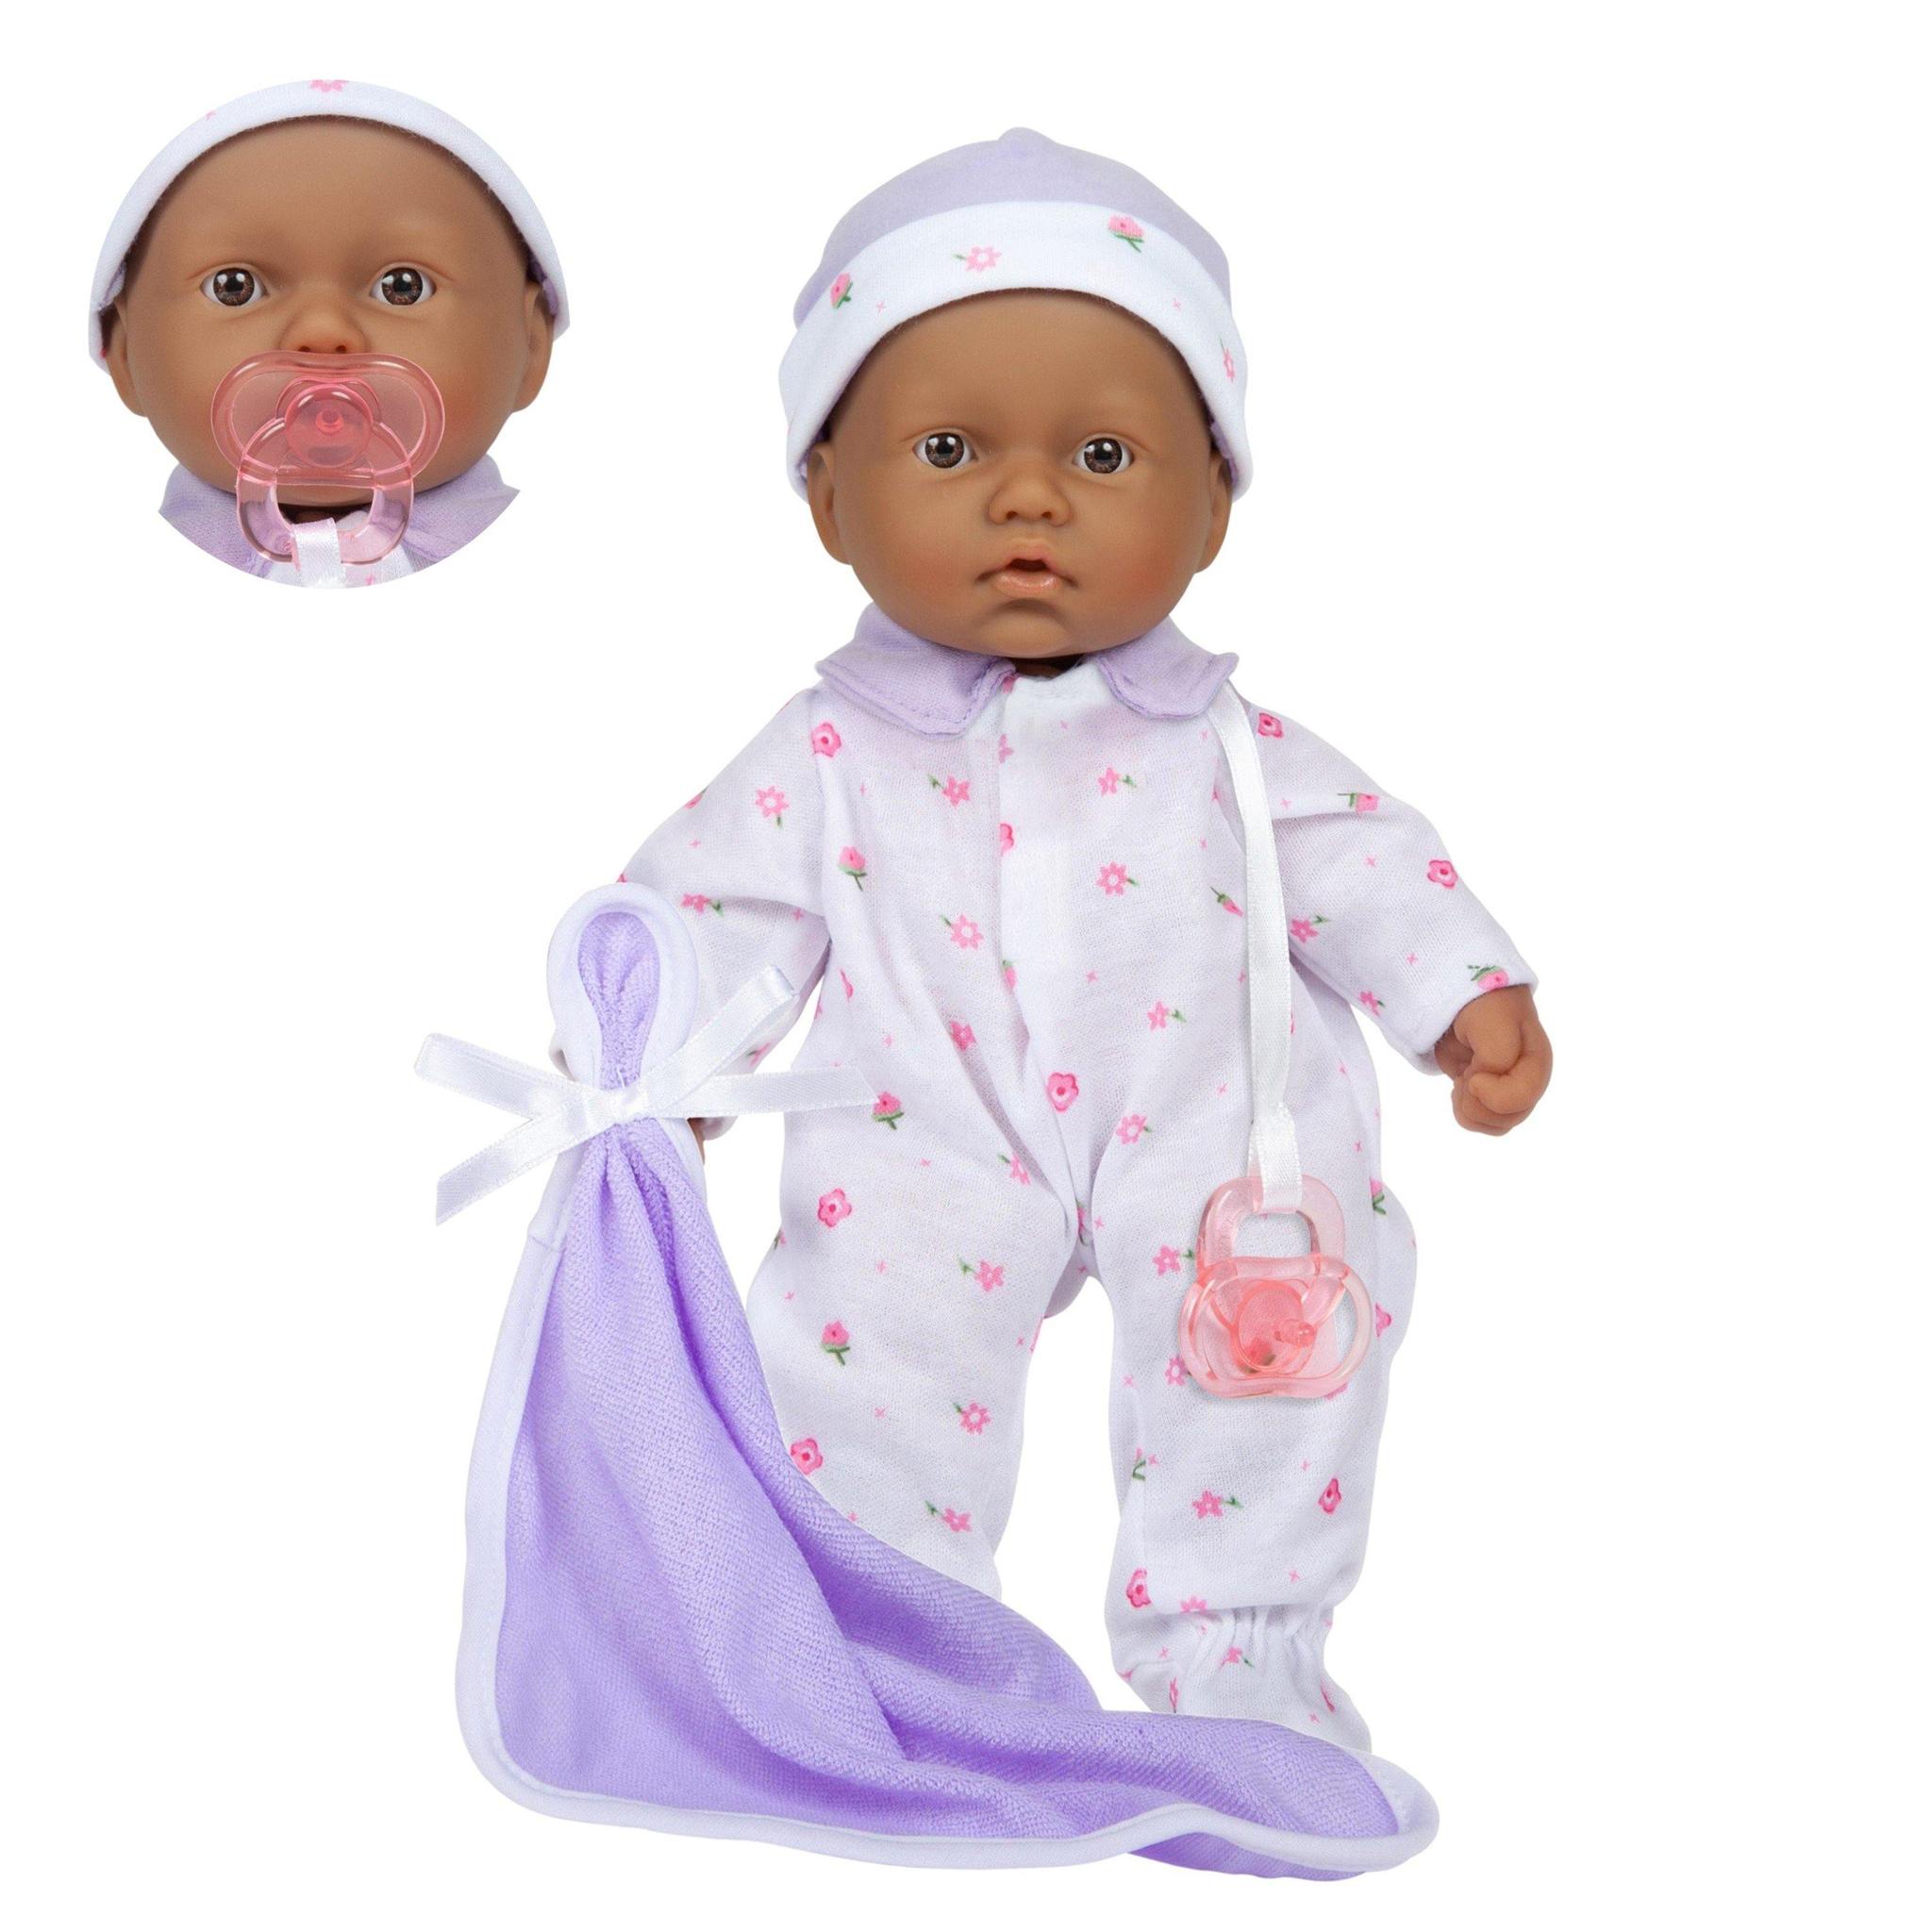 Picture of La Baby 11 in. Soft Body Hispanic Baby Doll in Purple Outfit